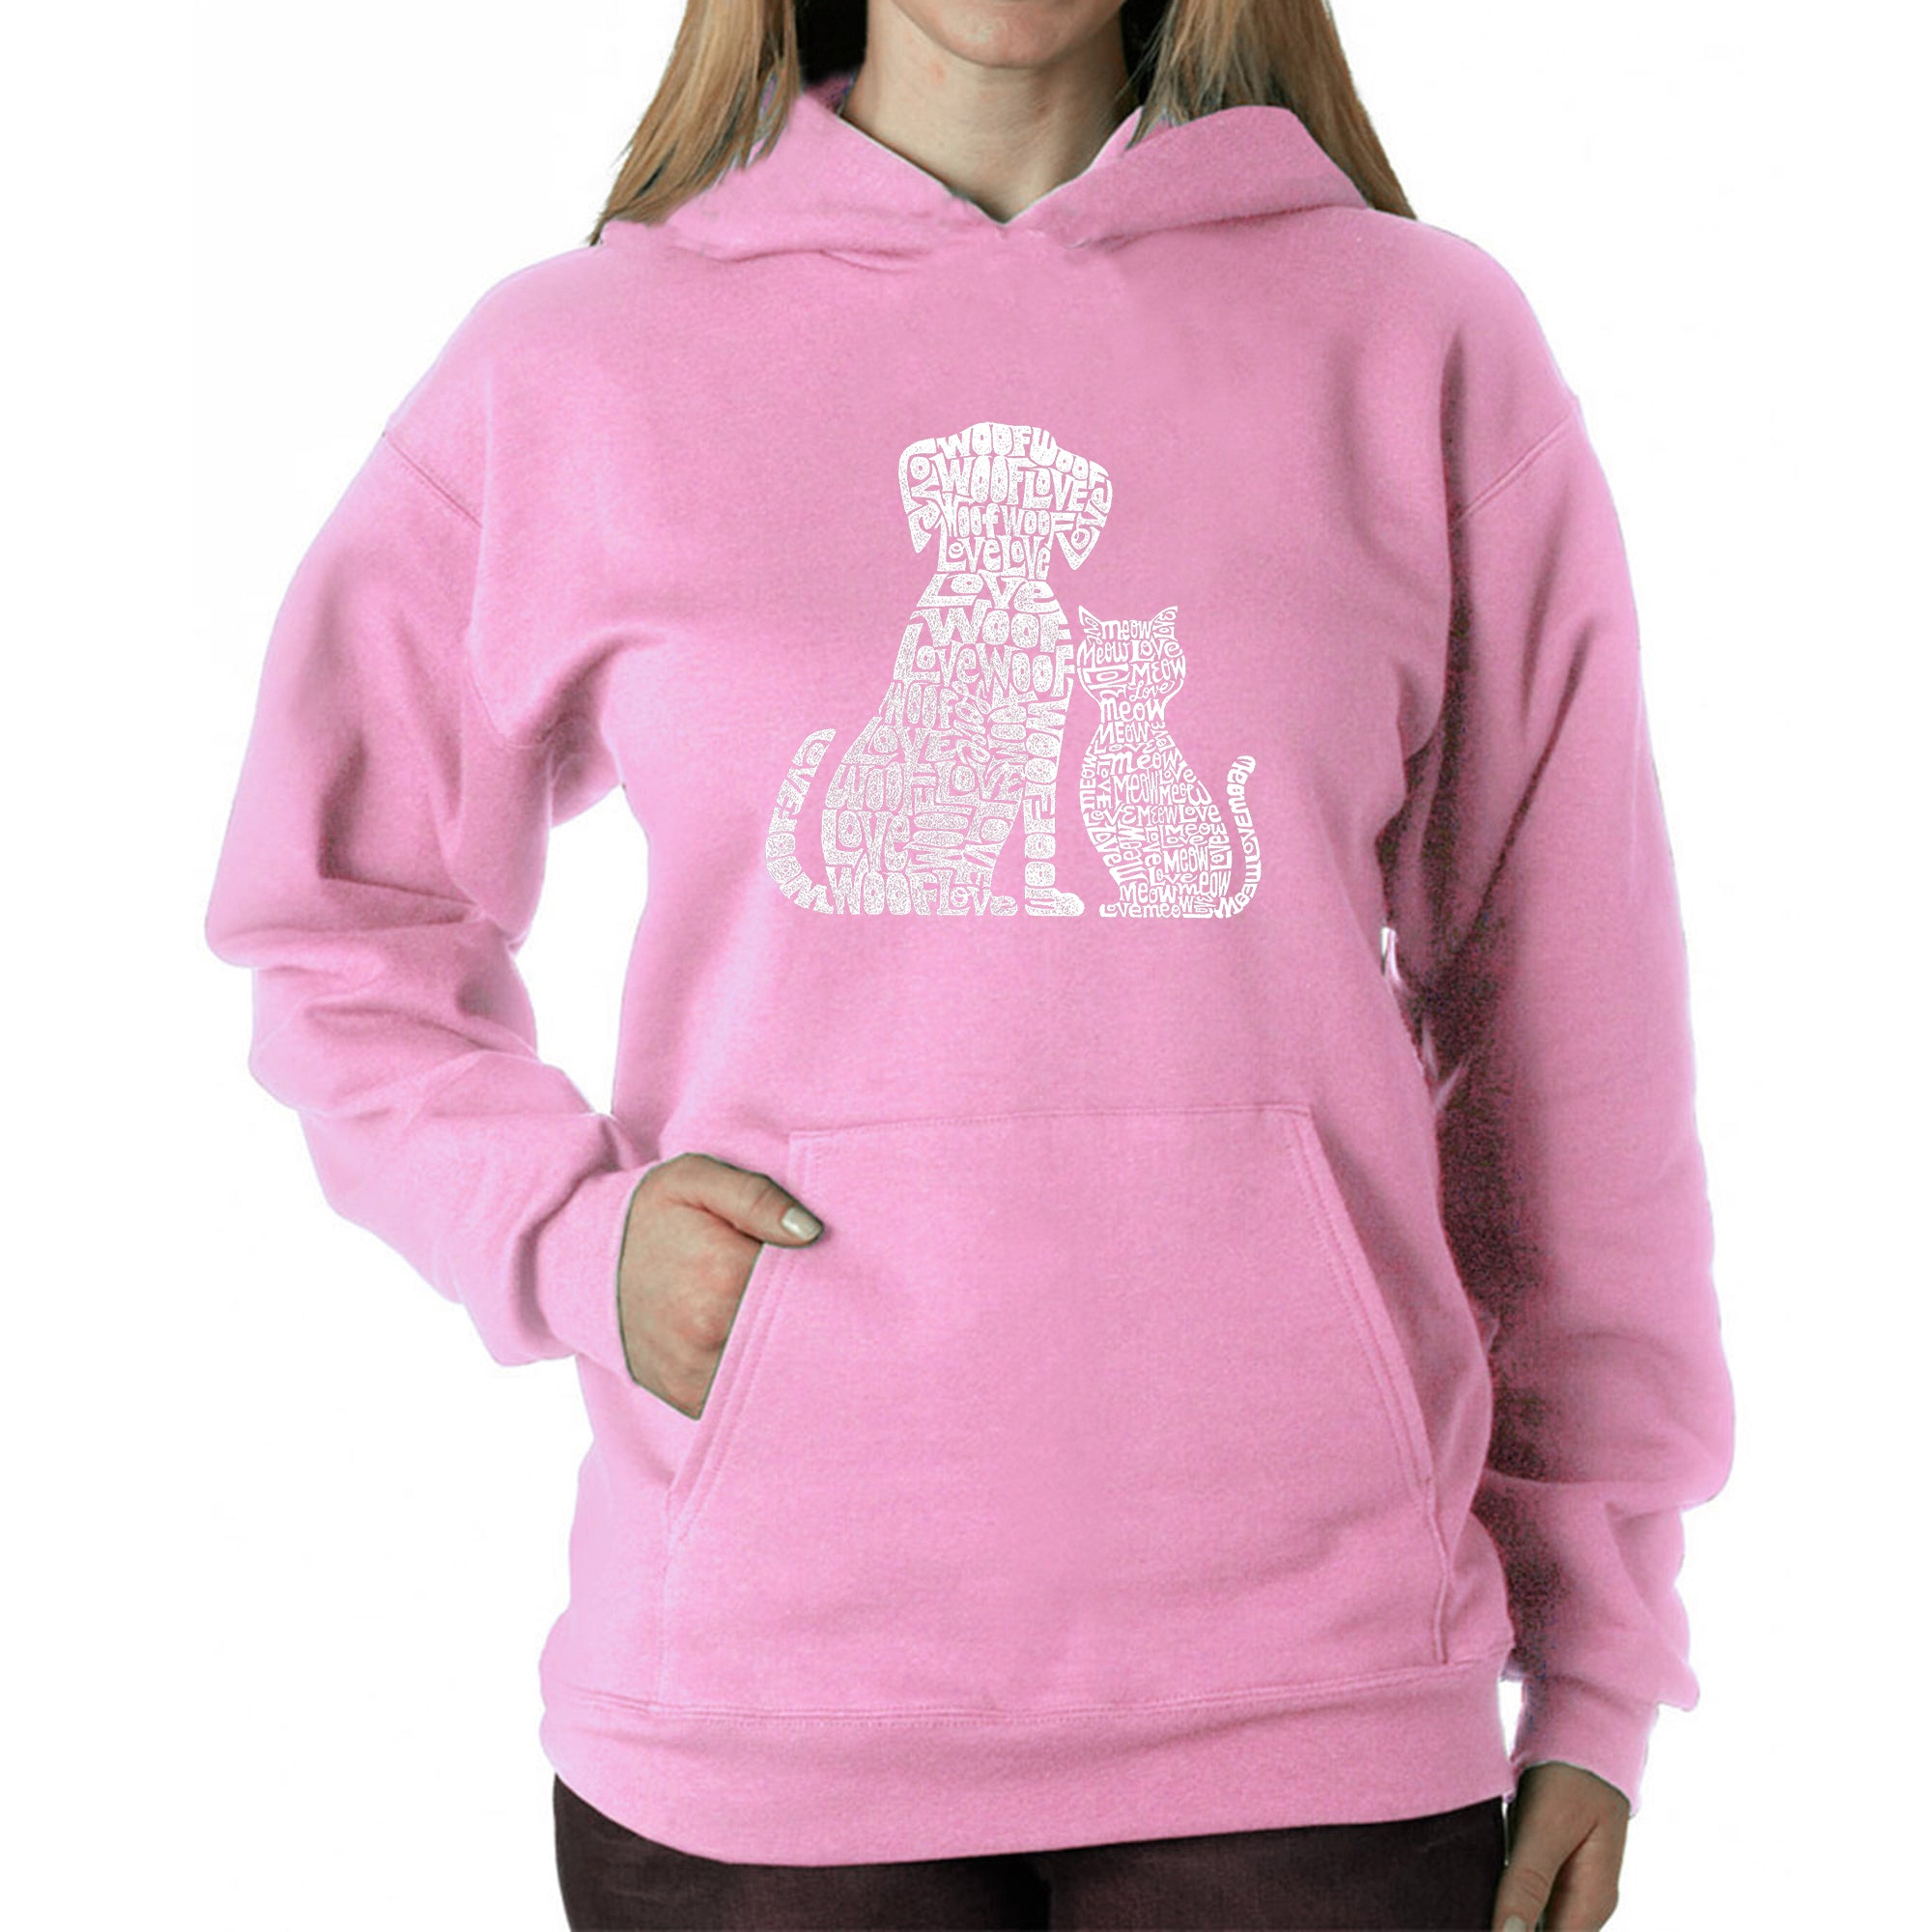 Dogs And Cats - Women's Word Art Hooded Sweatshirt - Black - X-Large